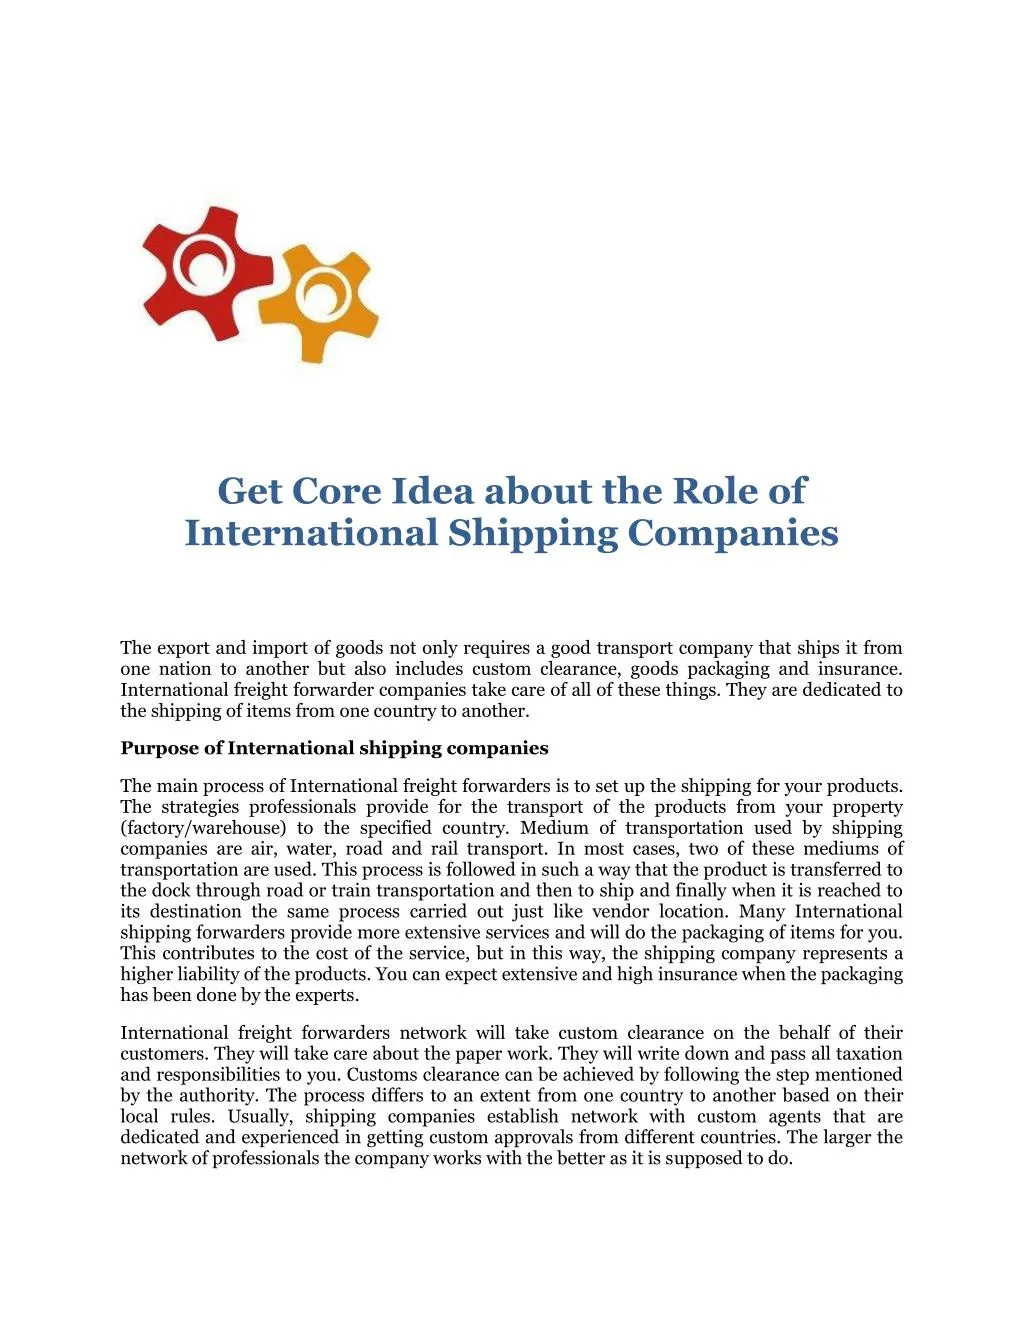 get core idea about the role of international